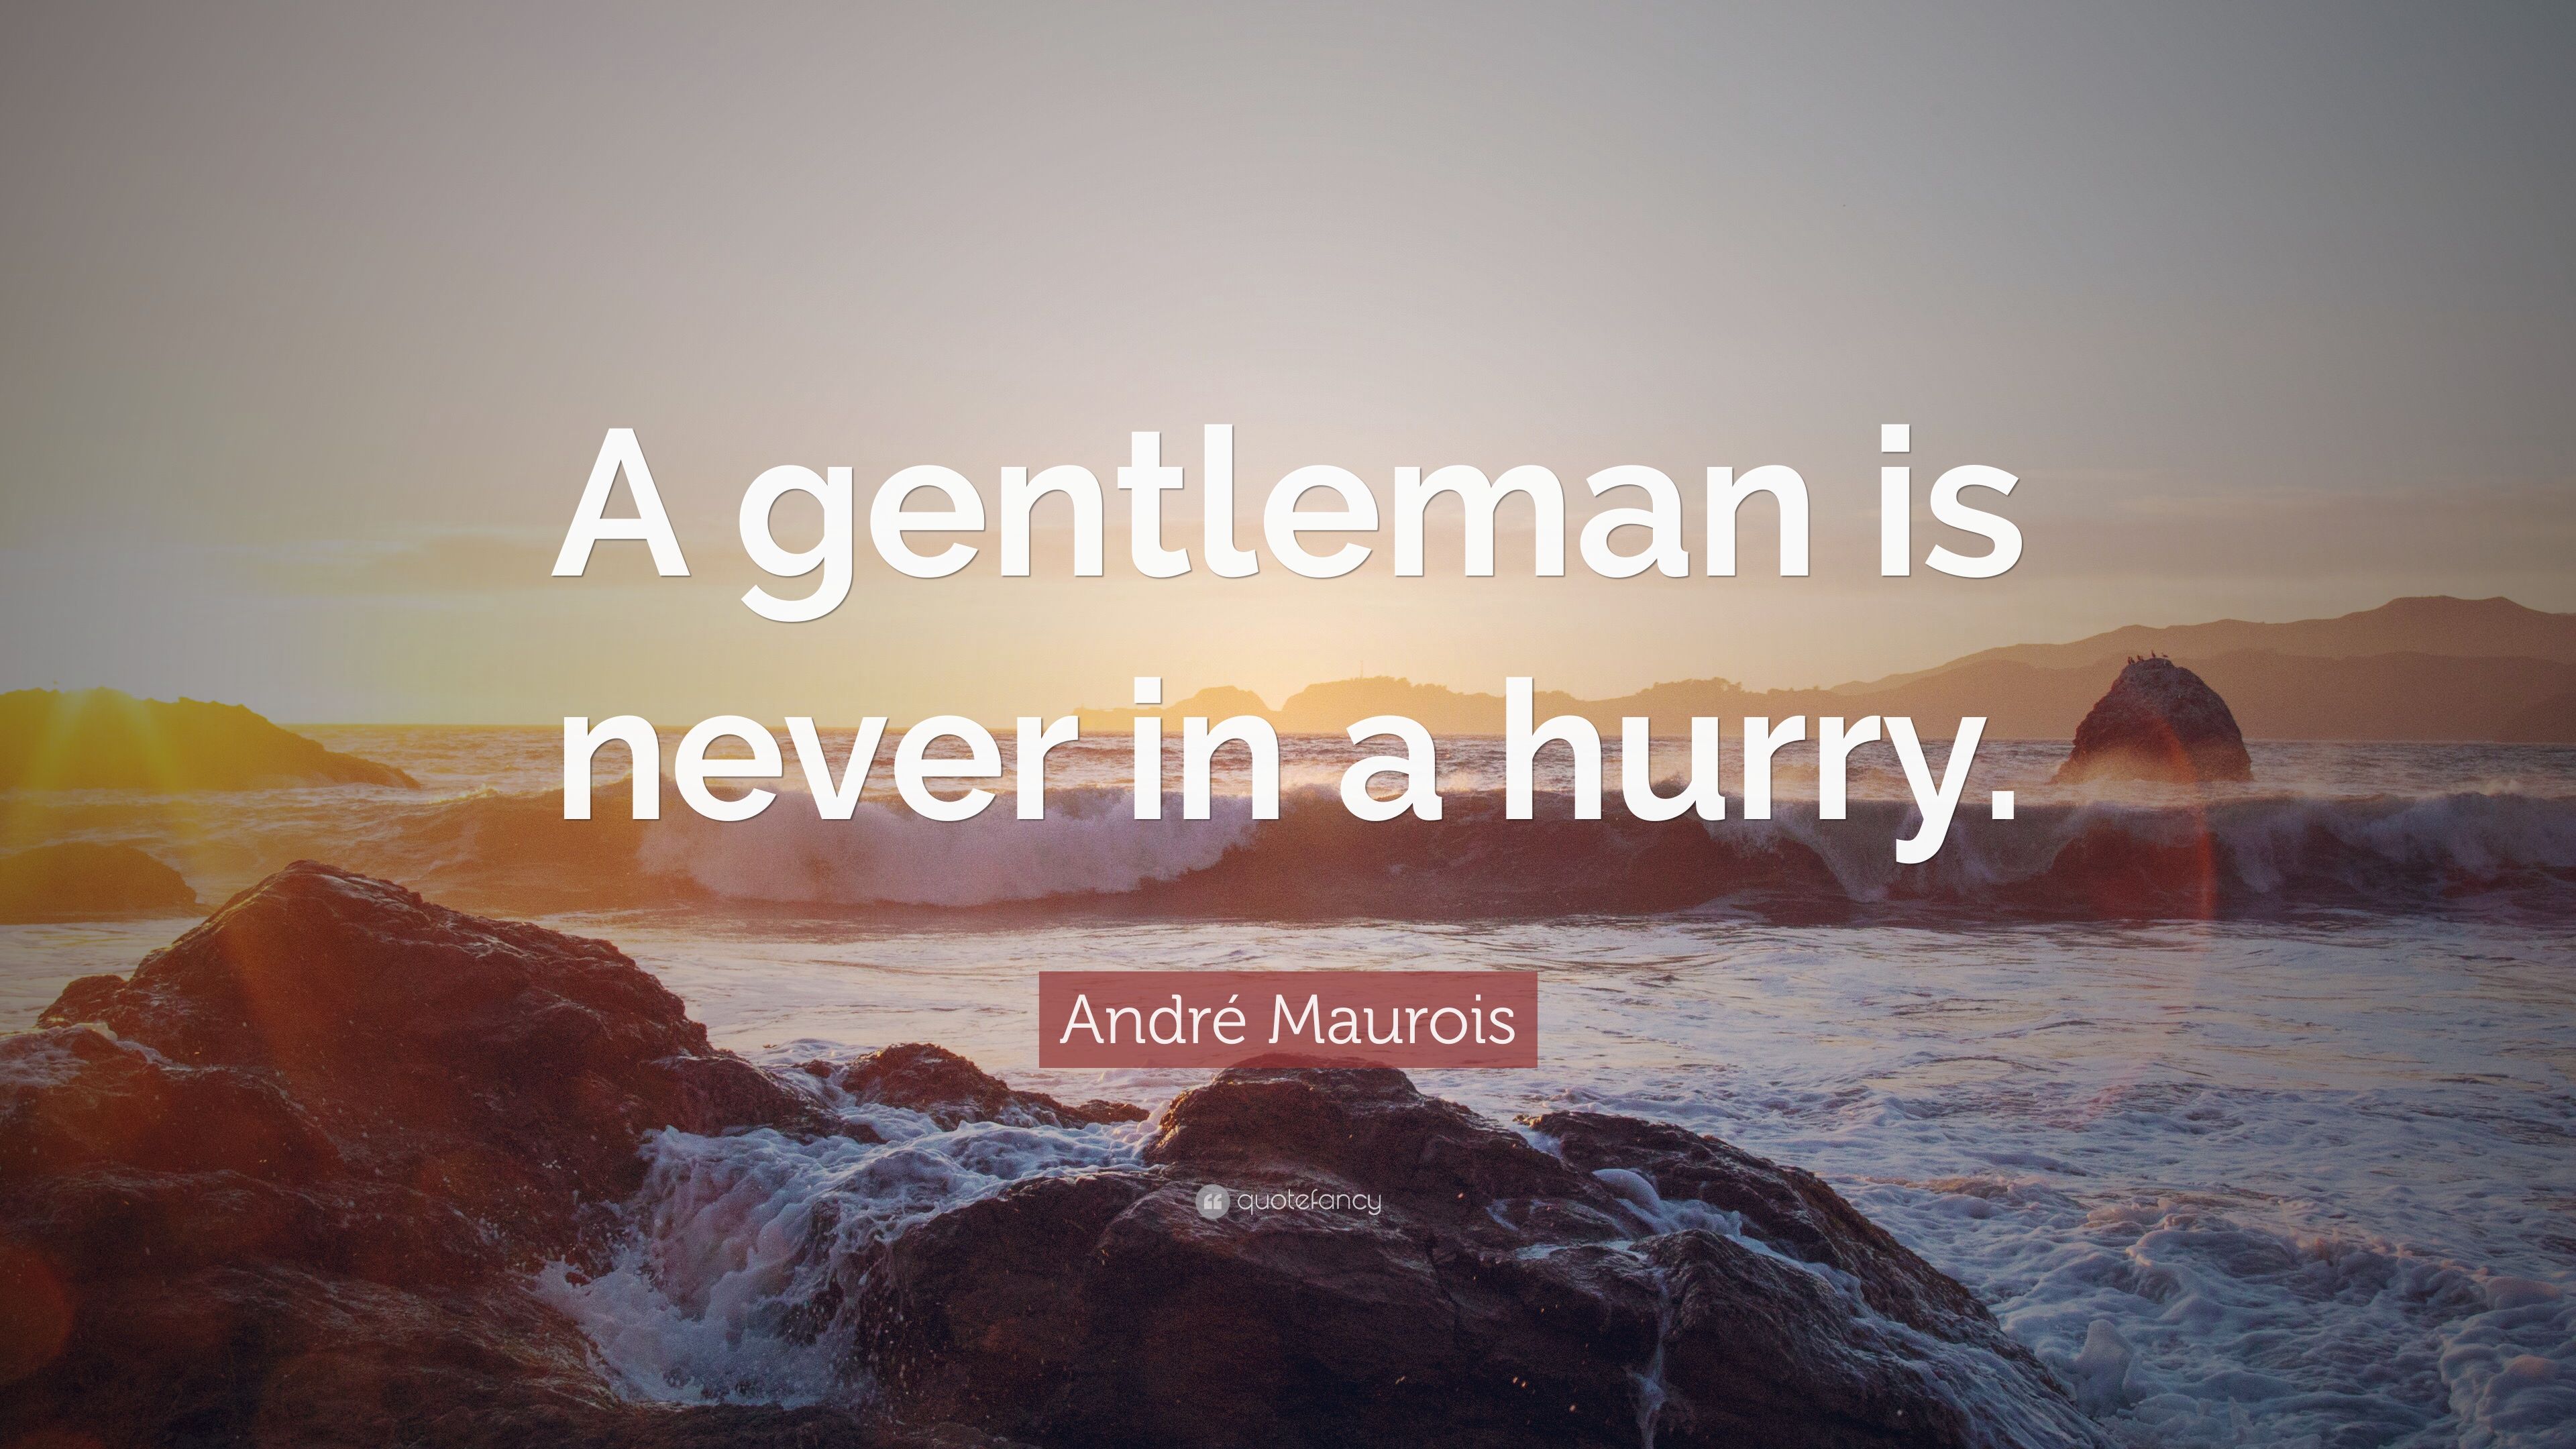 André Maurois Quote: “A gentleman is never in a hurry.”